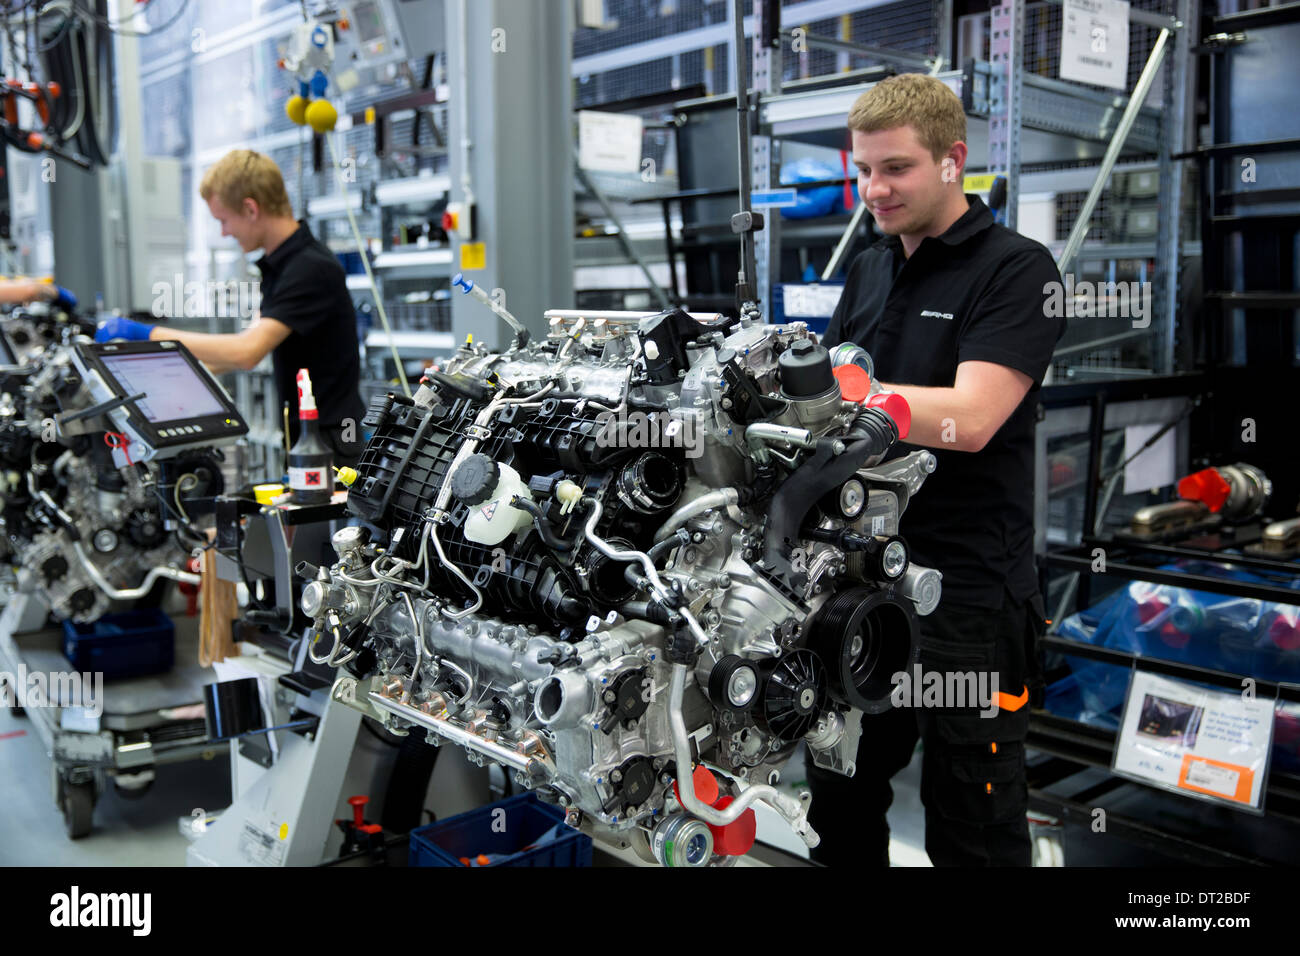 Mercedes-AMG engine production factory in Affalterbach, Germany engineer  hand-building one complete M157 5.5L V8 biturbo engine Stock Photo - Alamy